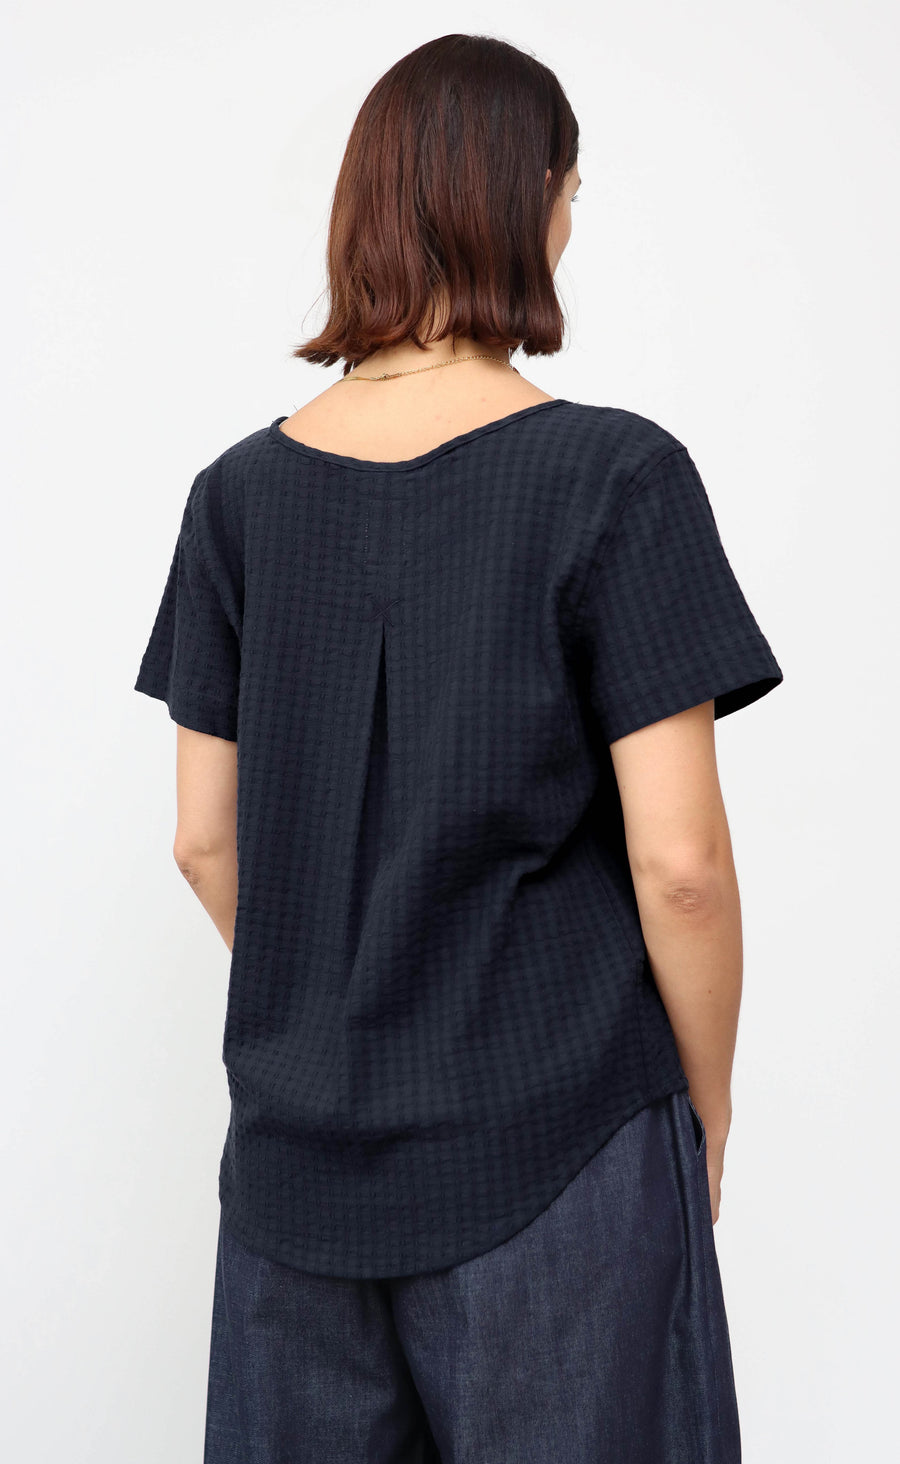 The Darling - Woven Tee - Textured Crepe